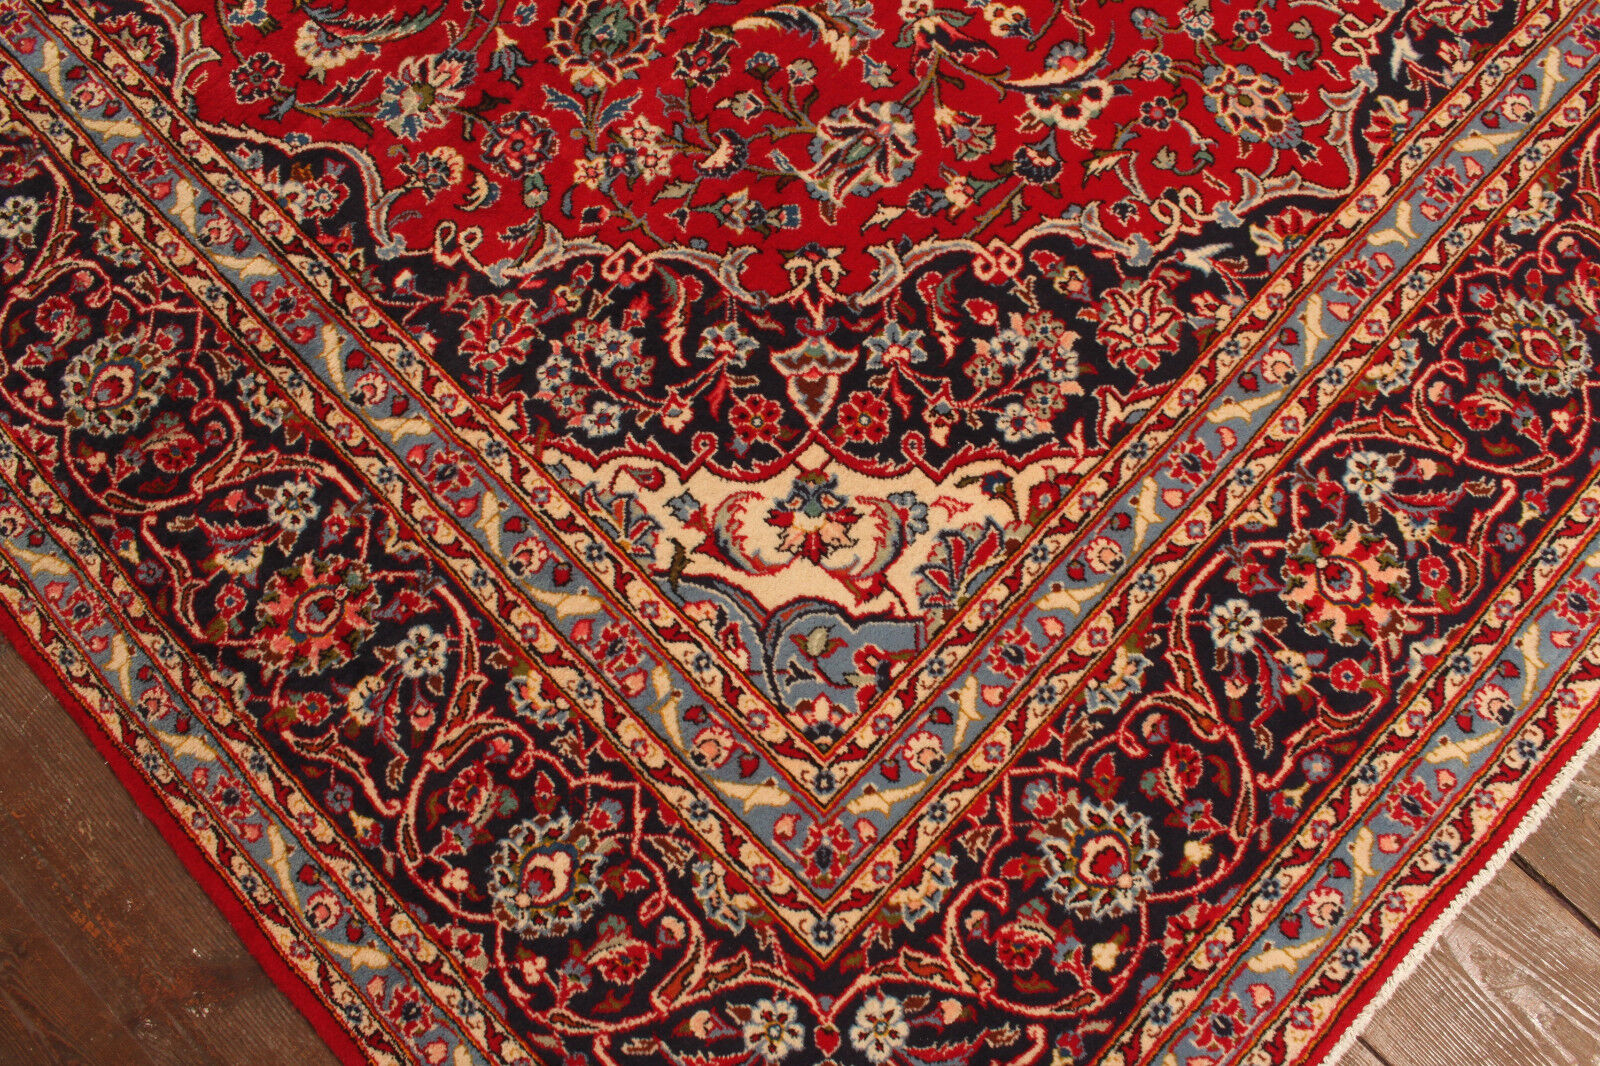 Close-up of the rich red color of the Handmade Vintage Persian Style Kashan Rug